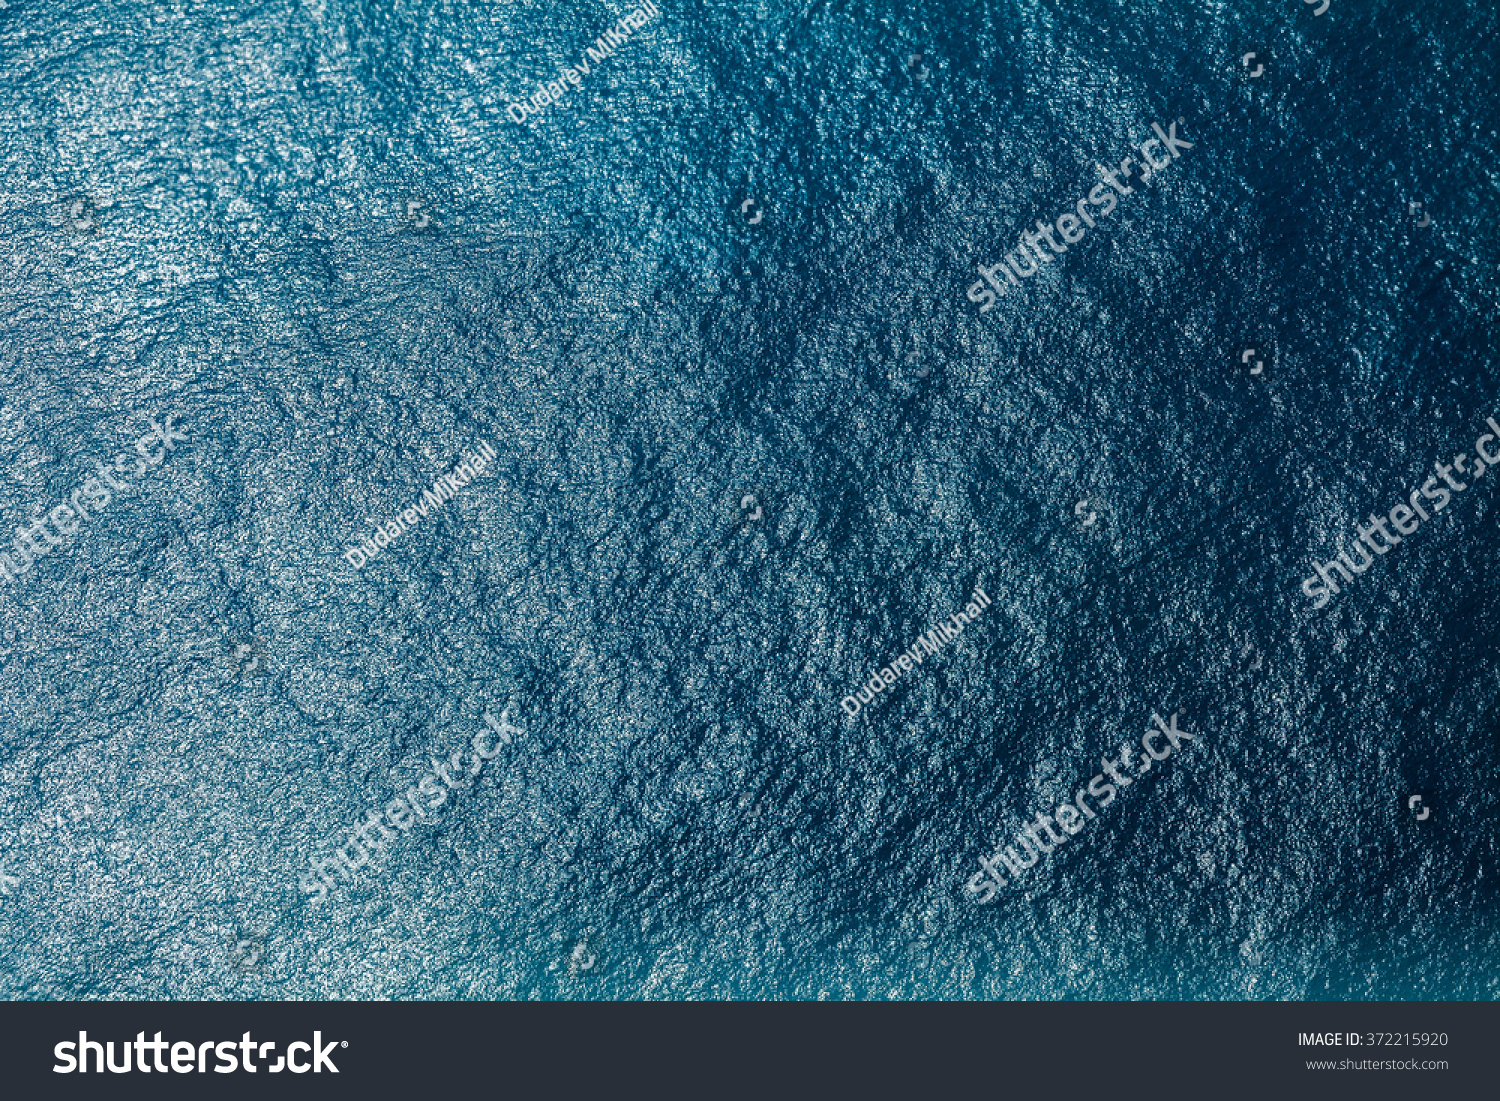 Sea surface aerial view #372215920